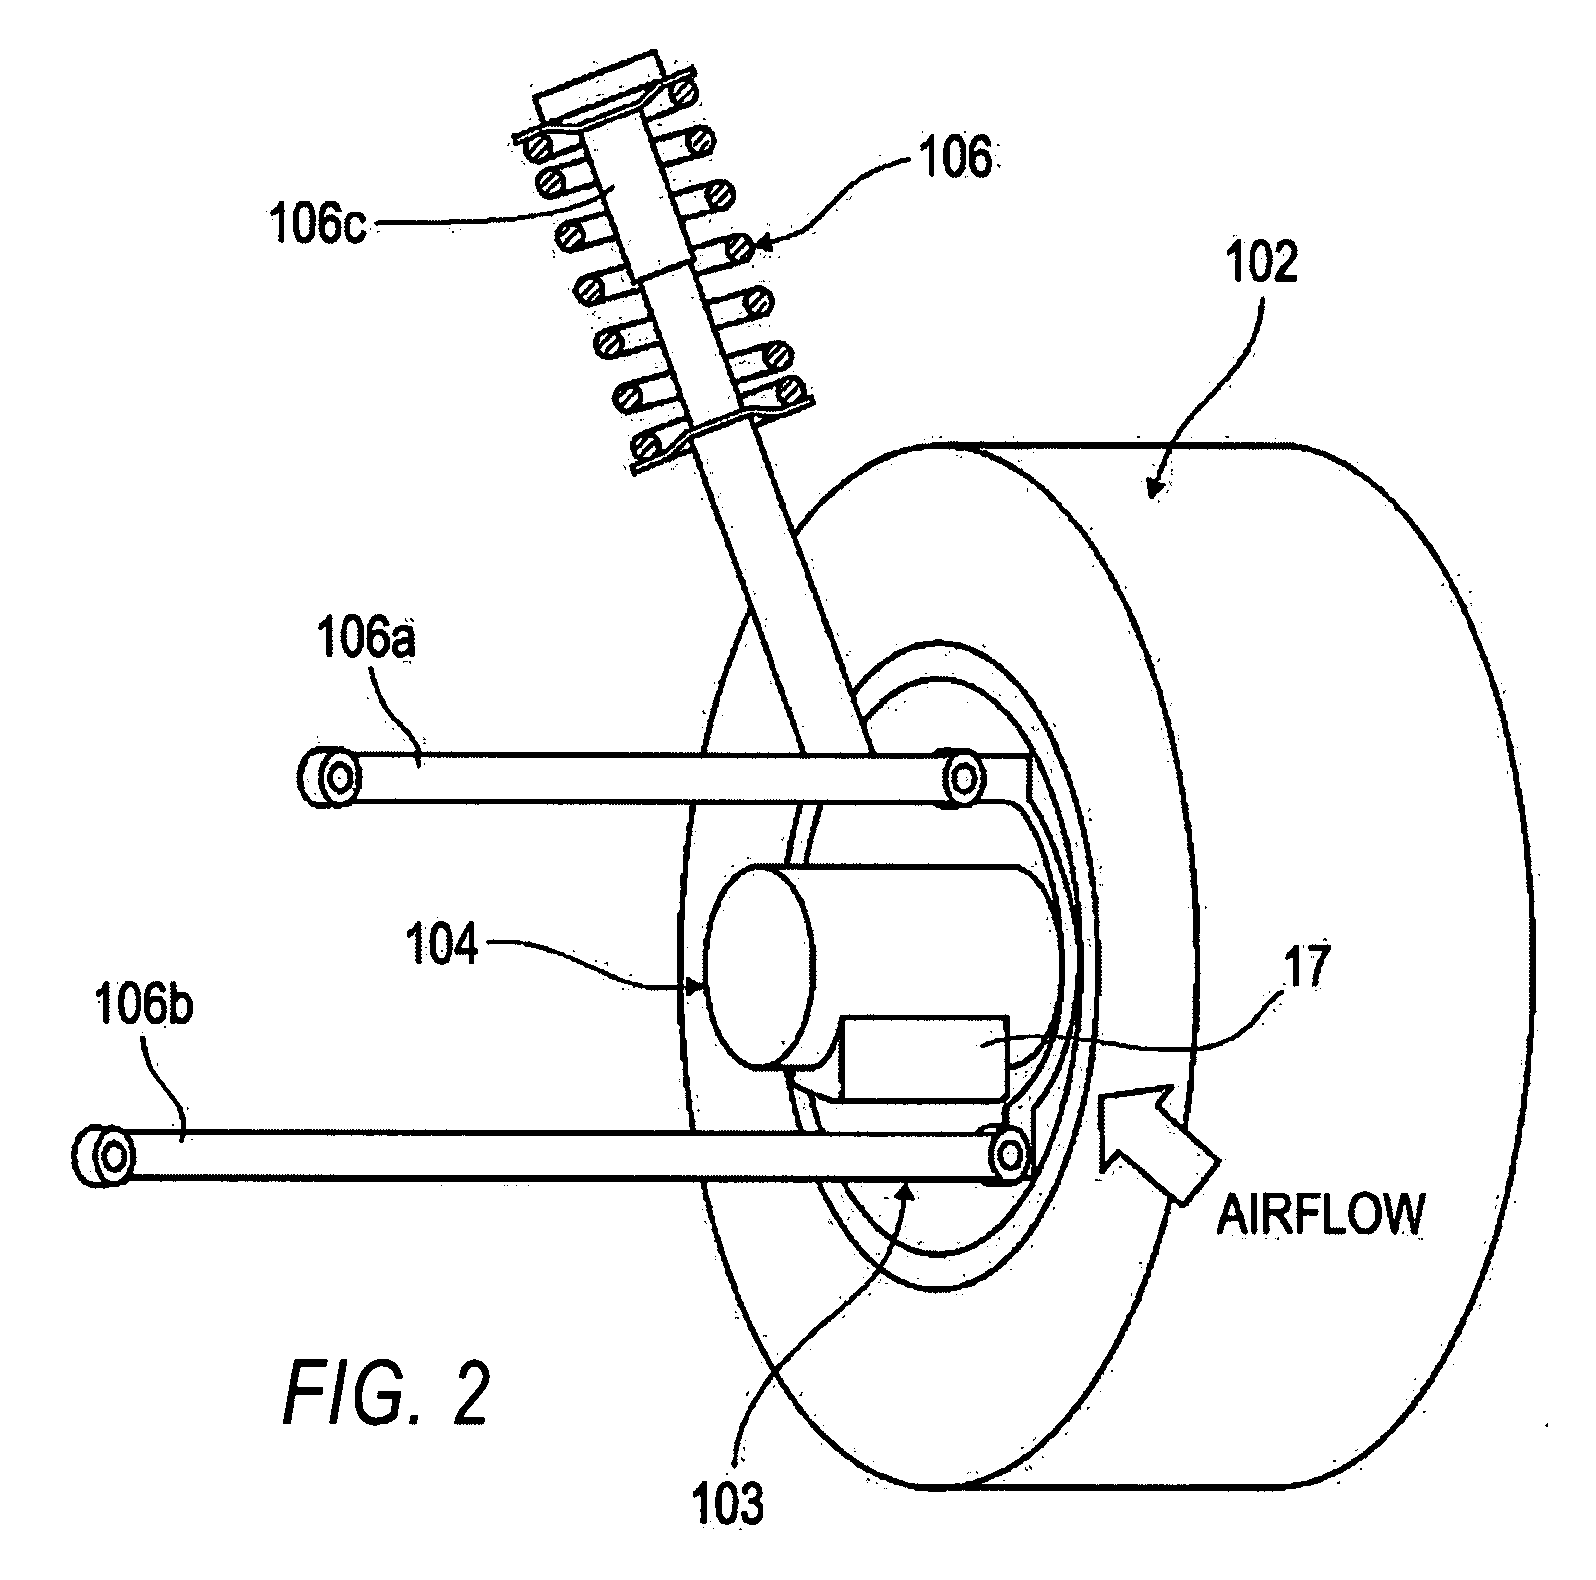 Apparatus for cooling a heat-generating member and method